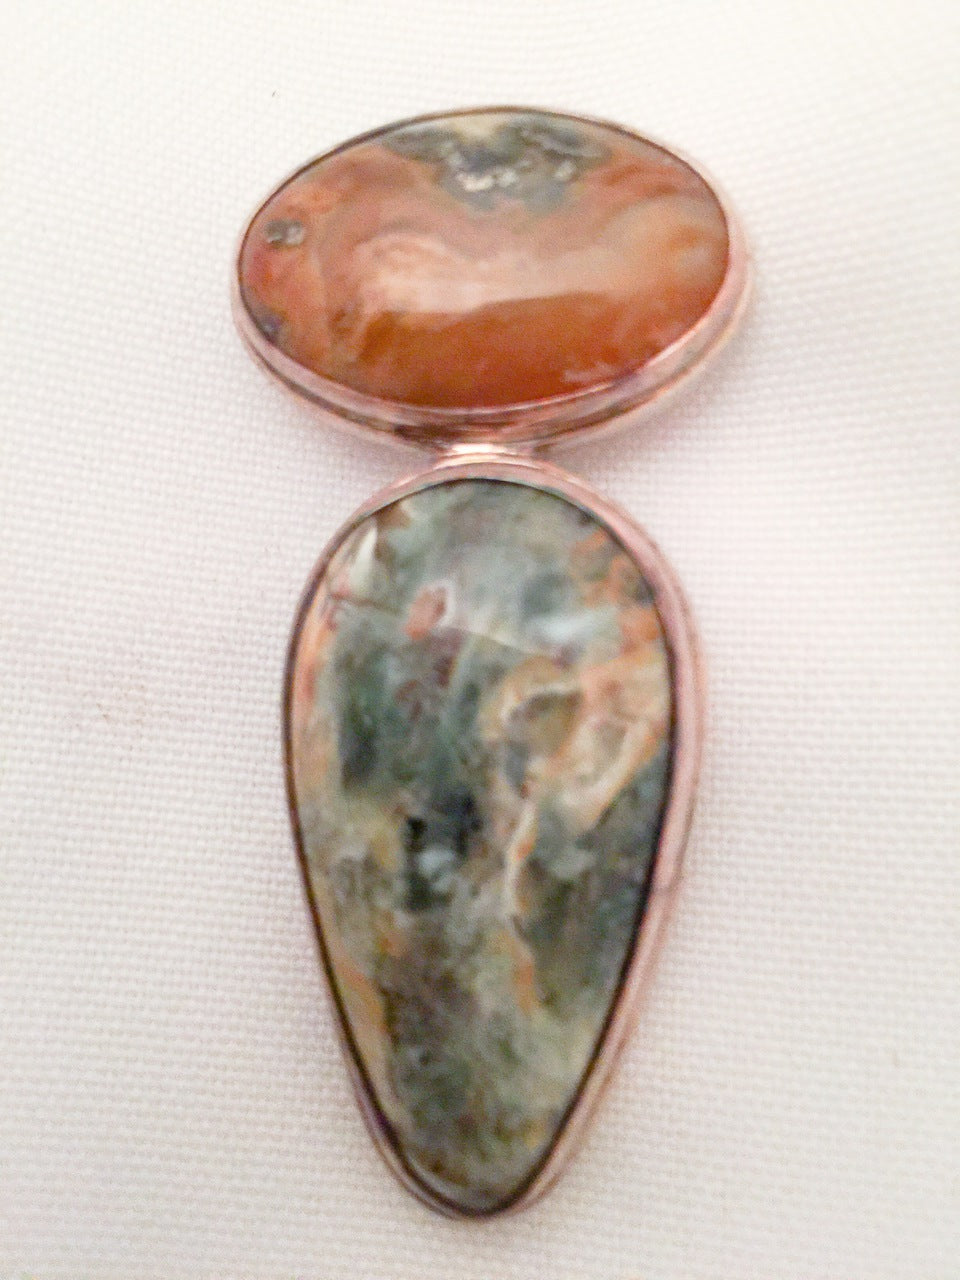 Long Agate Pendant set in Heavy Sterling Silver Green Brown Earth Tones